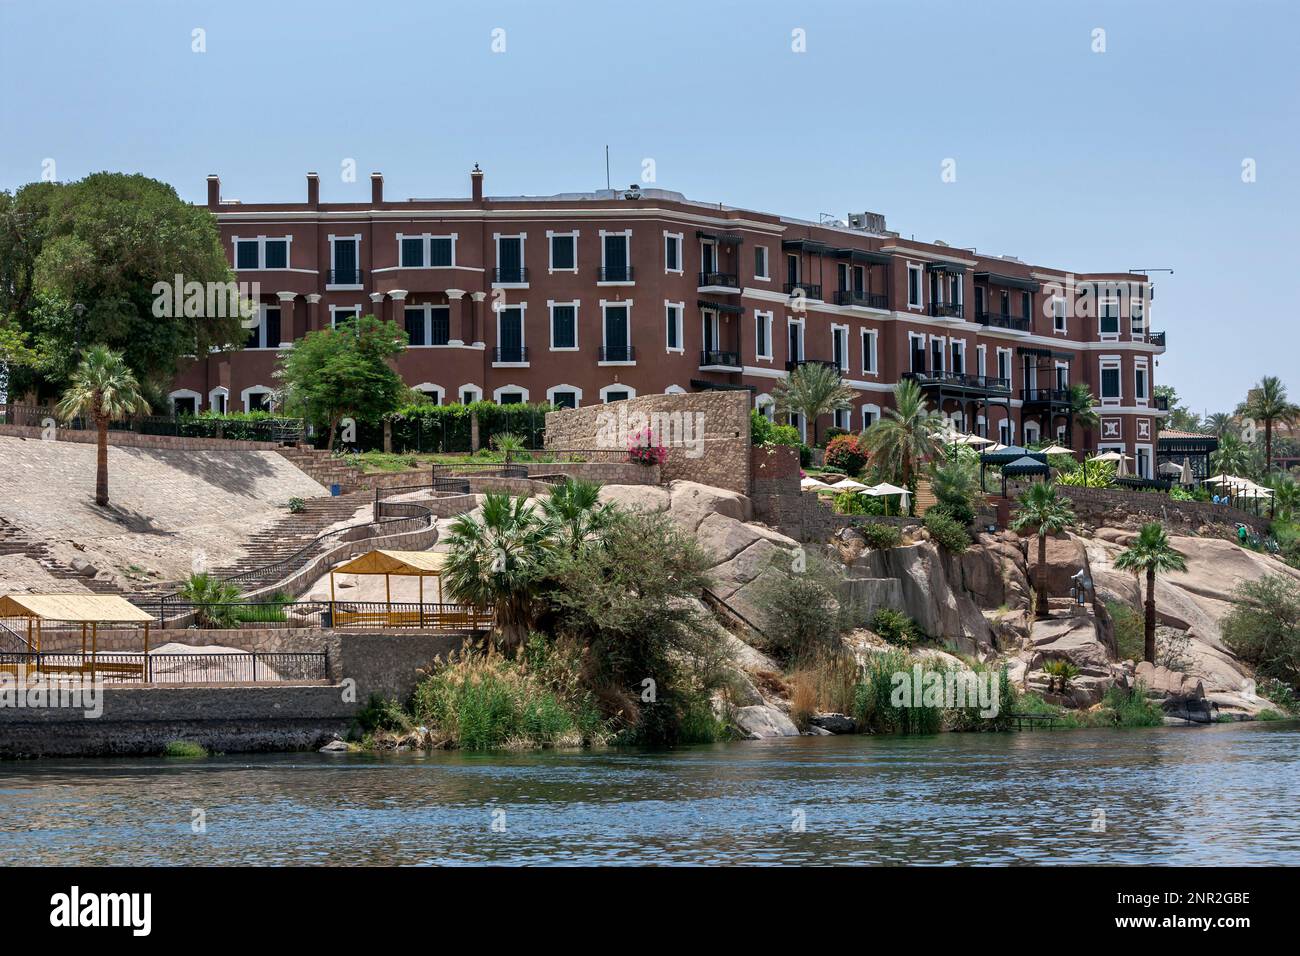 The famous Old Cataract Hotel which overlooks the River Nile at Aswan in Egypt. It was built in 1899 by Thomas Cook. Stock Photo